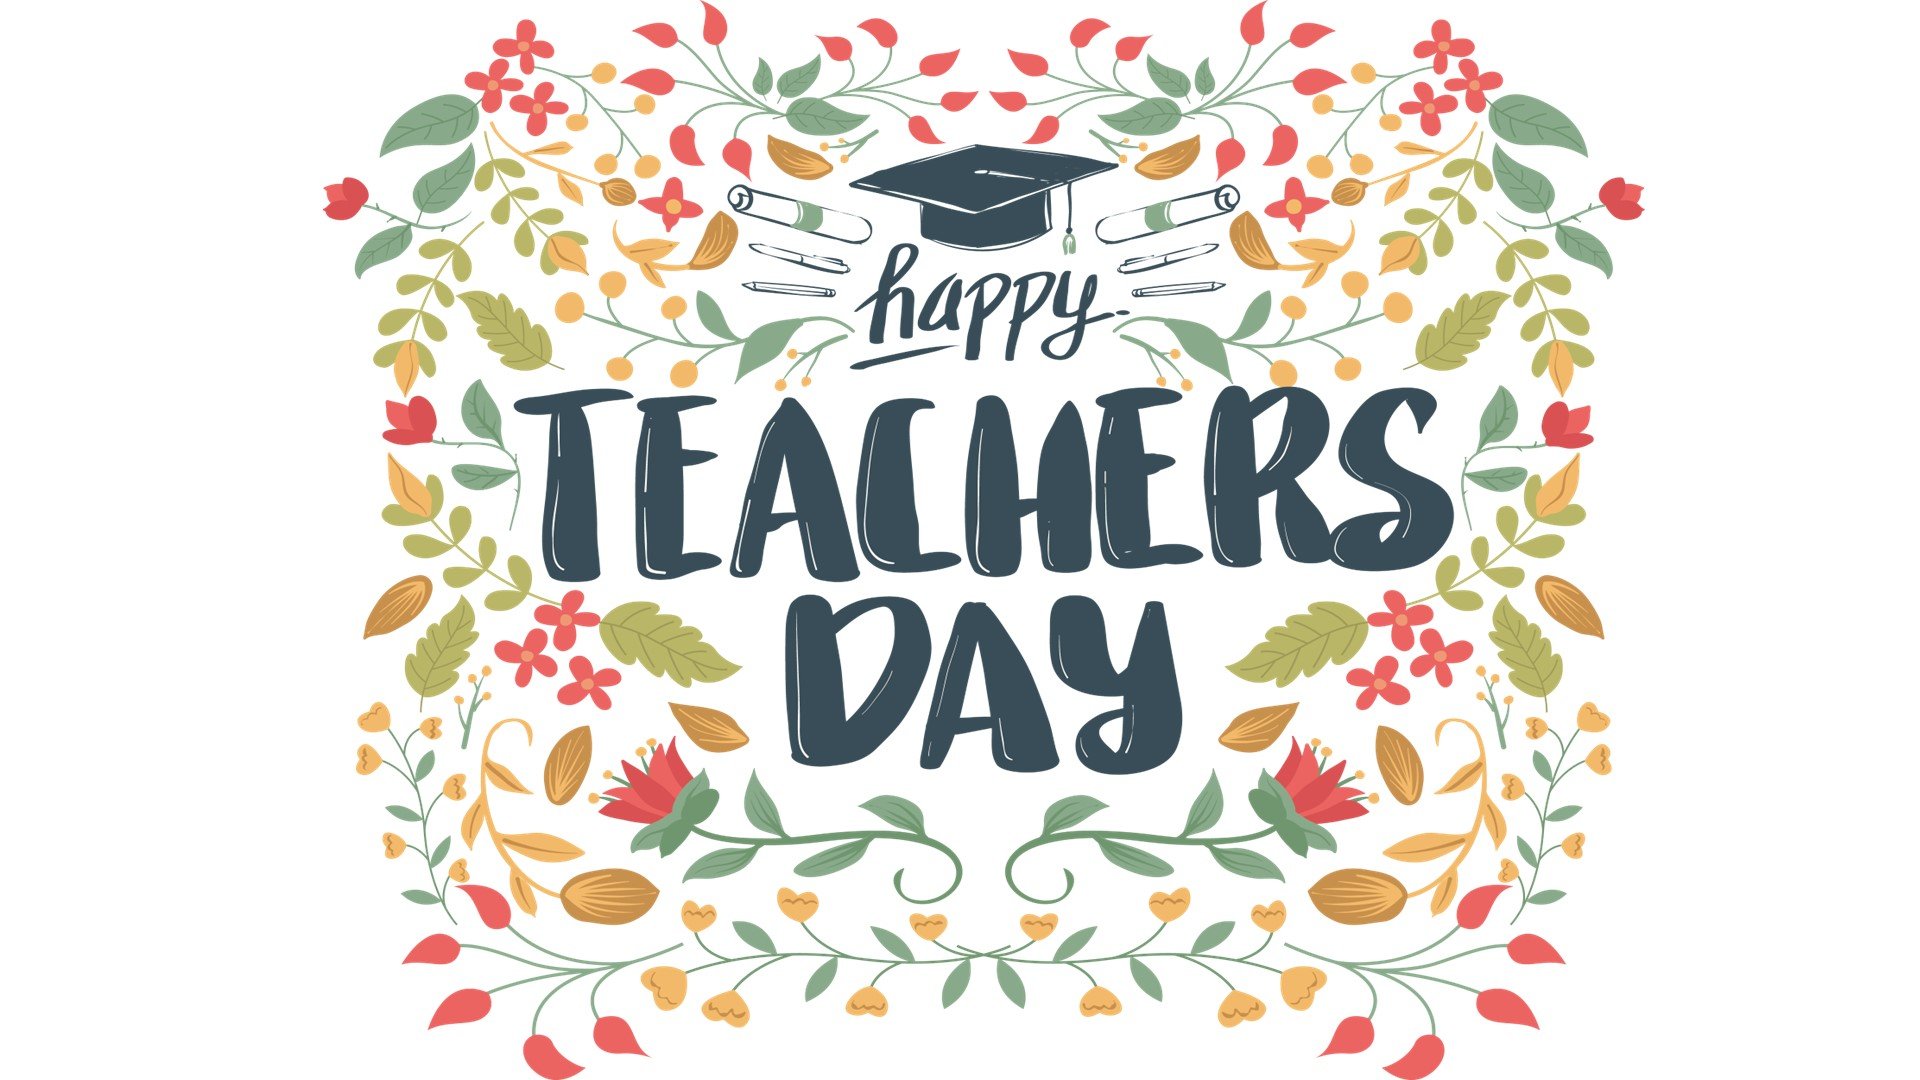 Thank you to all the teachers!